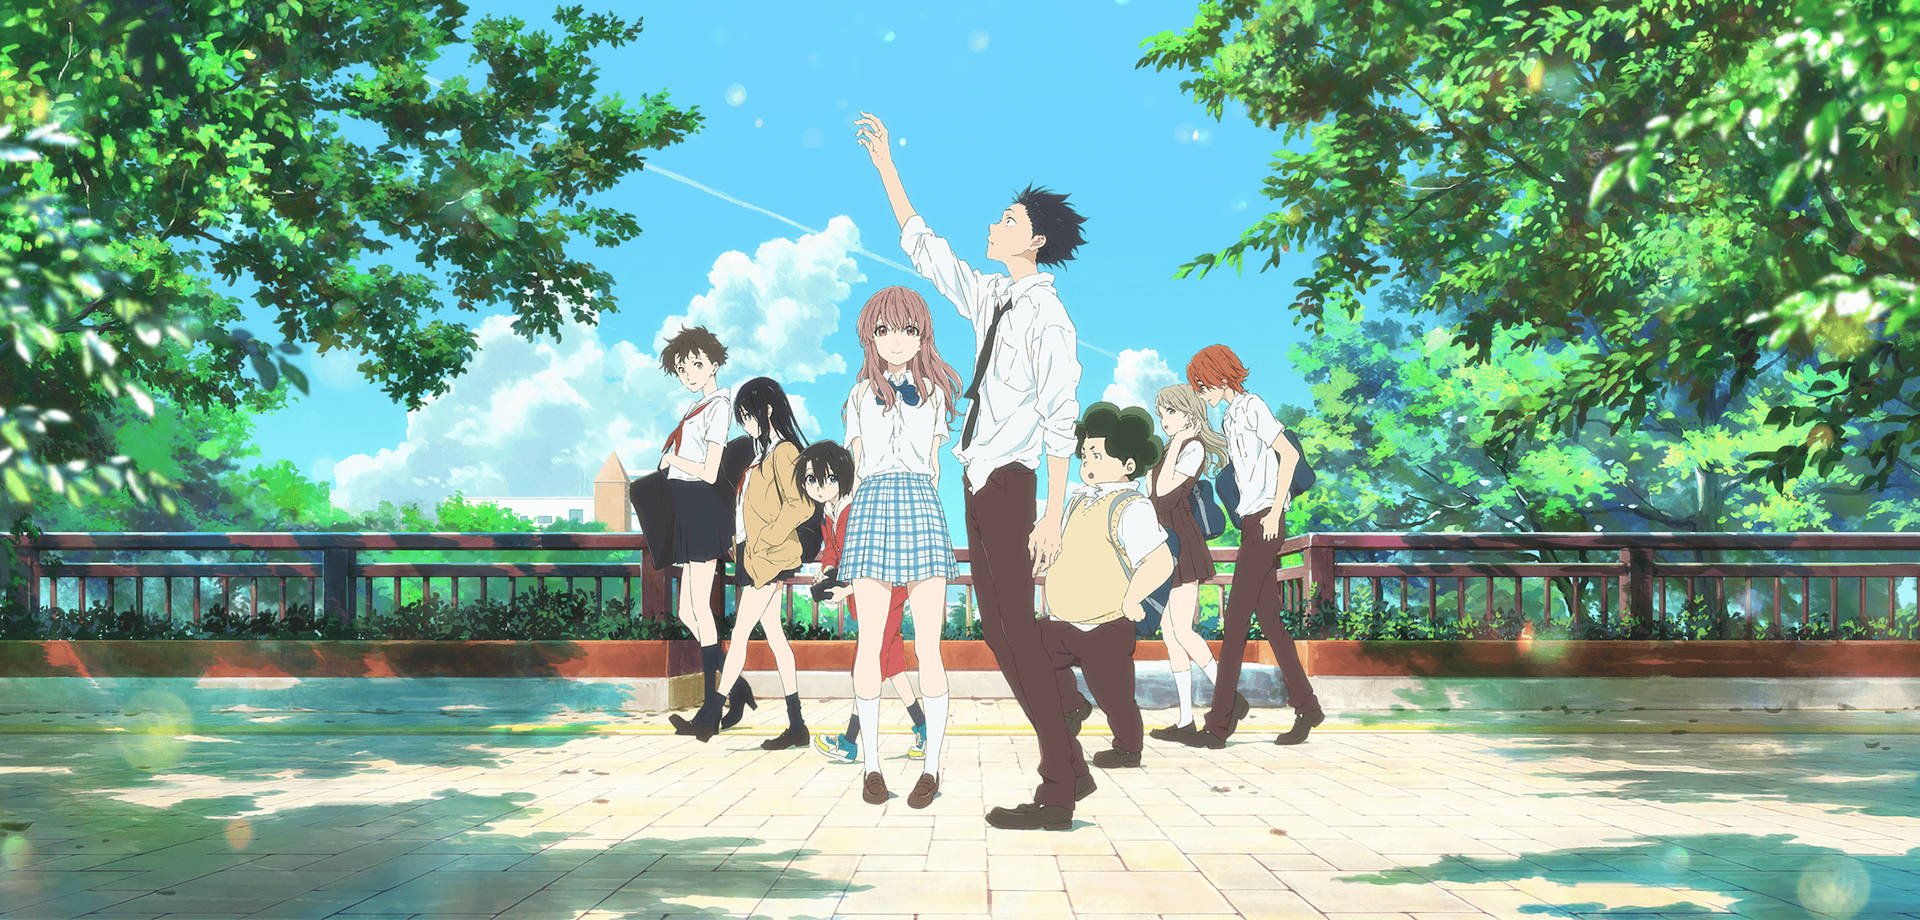 The main cast of A Silent Voice Wallpaper